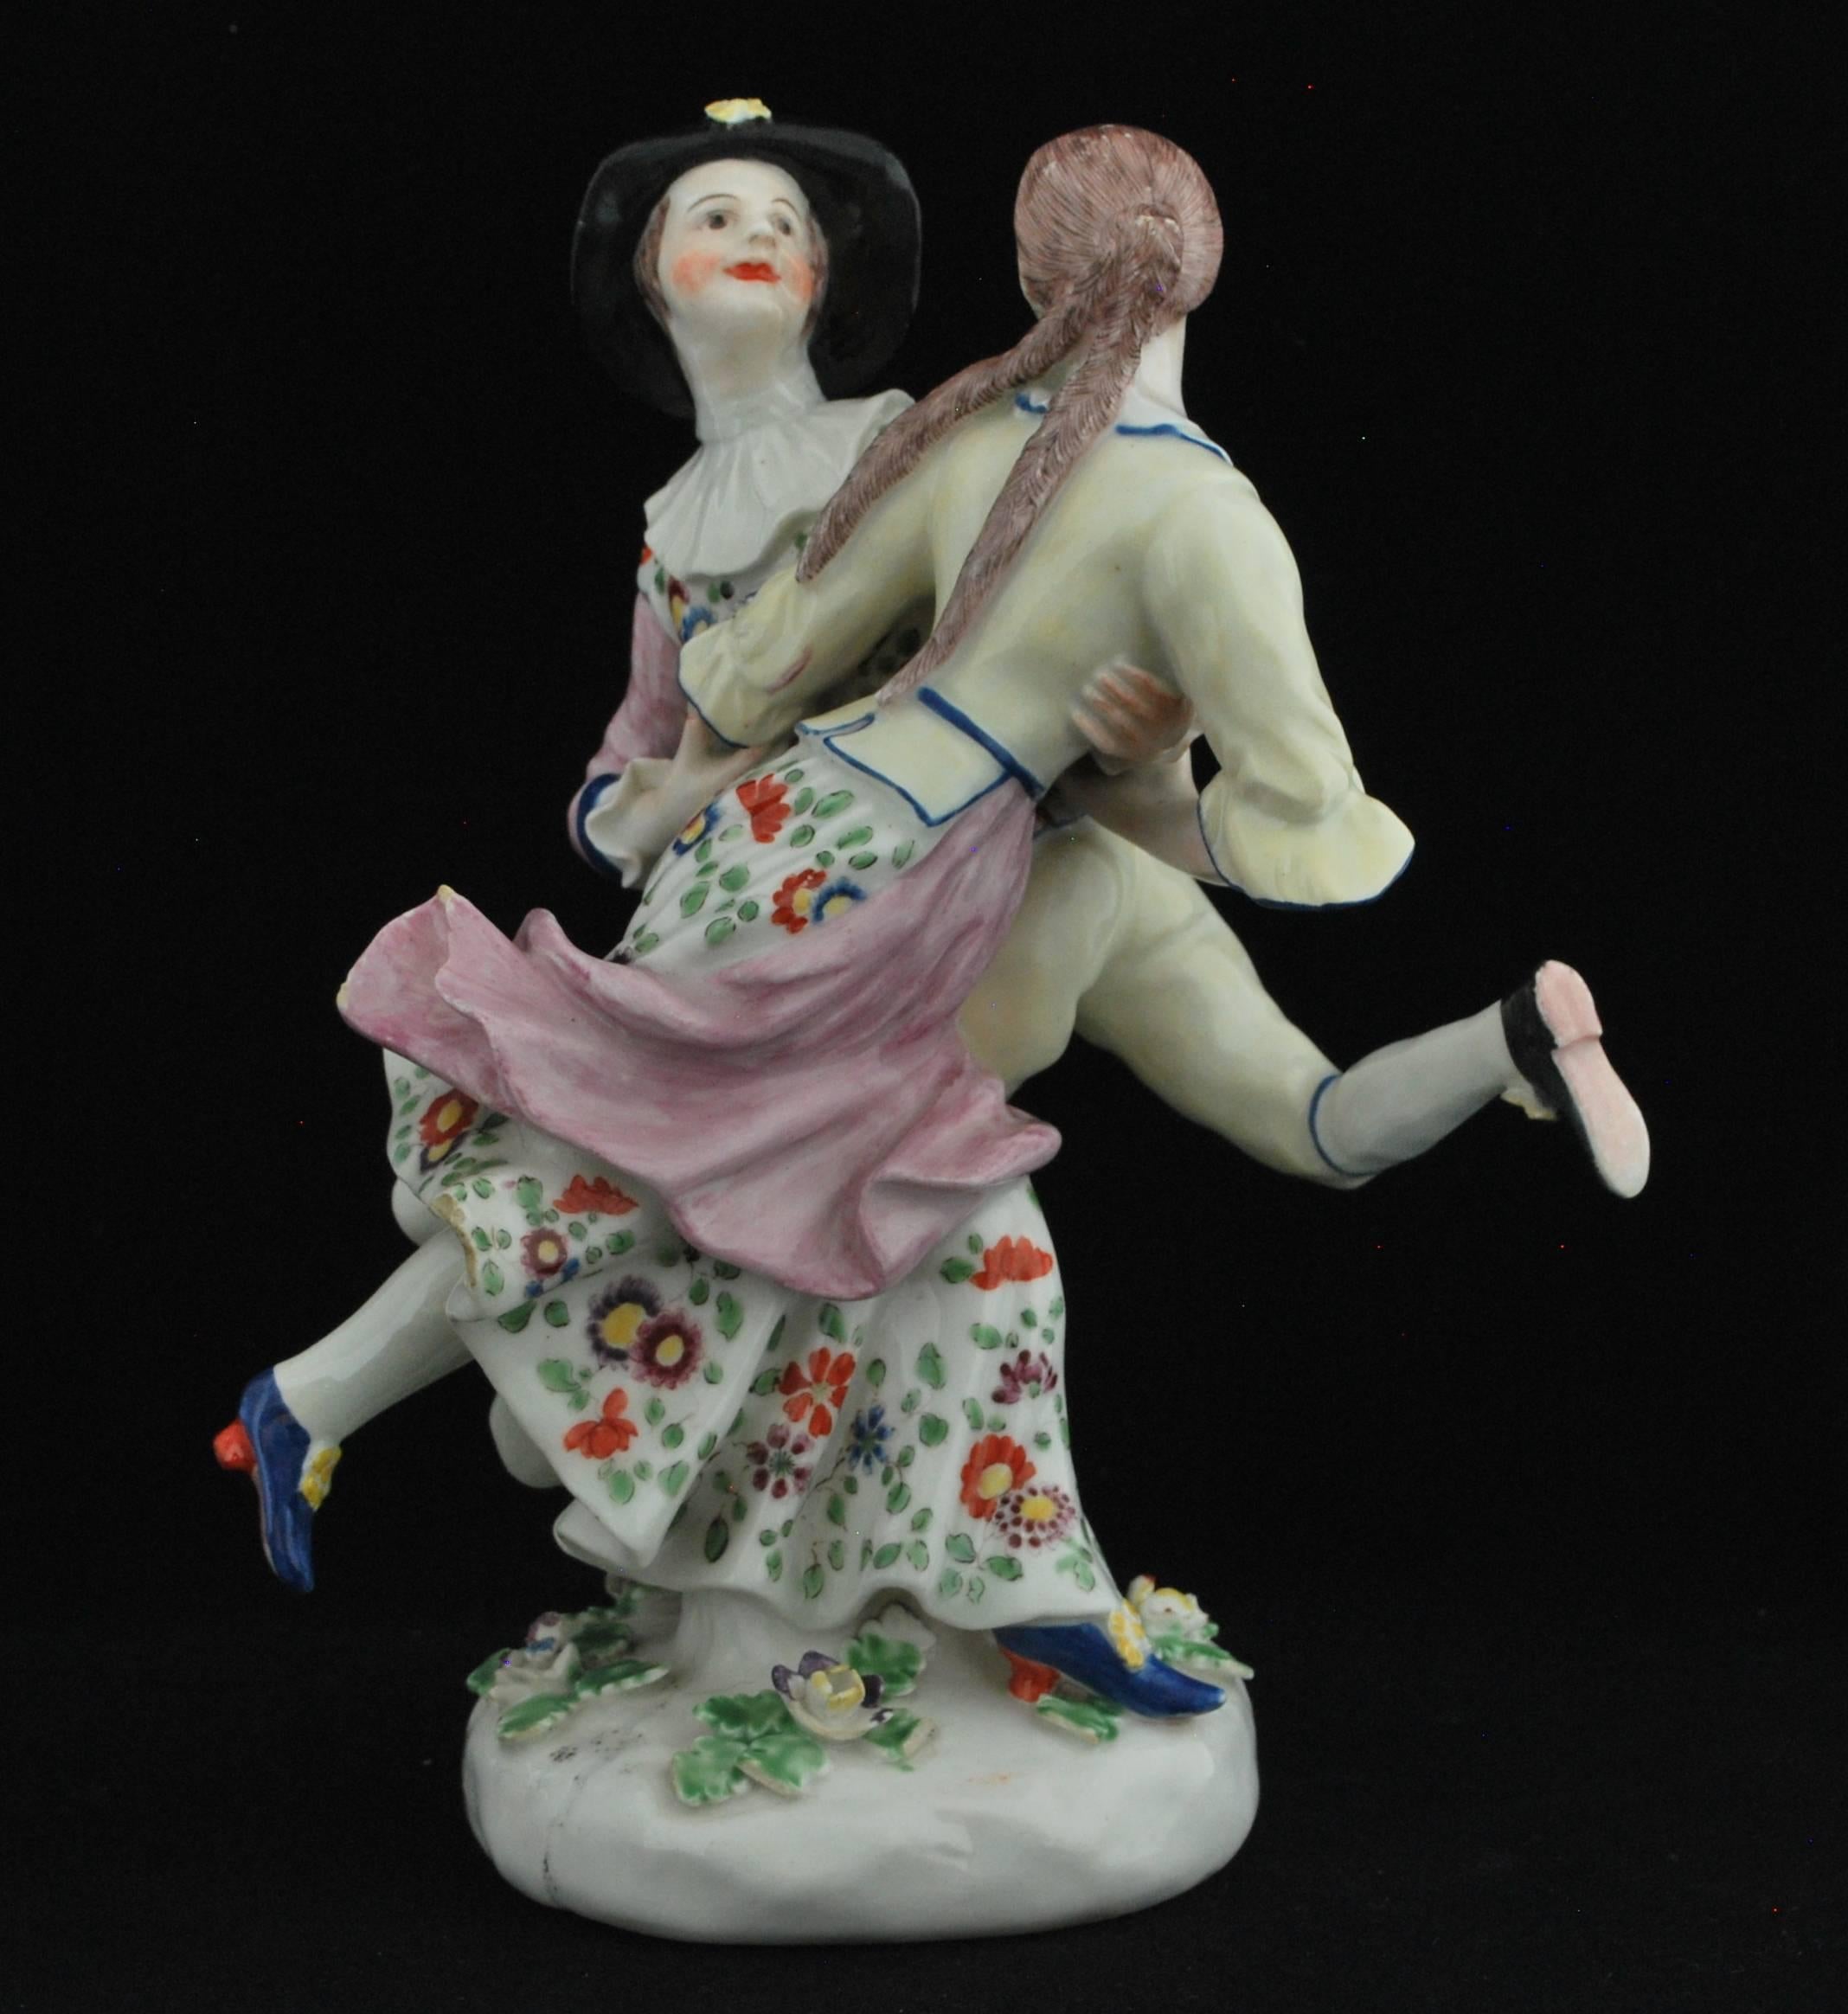 Dancers, modelled in the round, holding closely and each with one leg raised. He wears a rimmed hat with a yellow flowerhead; she bare headed with long soft brown plaits at her back. Both in costumes of pale yellow trimmed in blue, his sleeves and